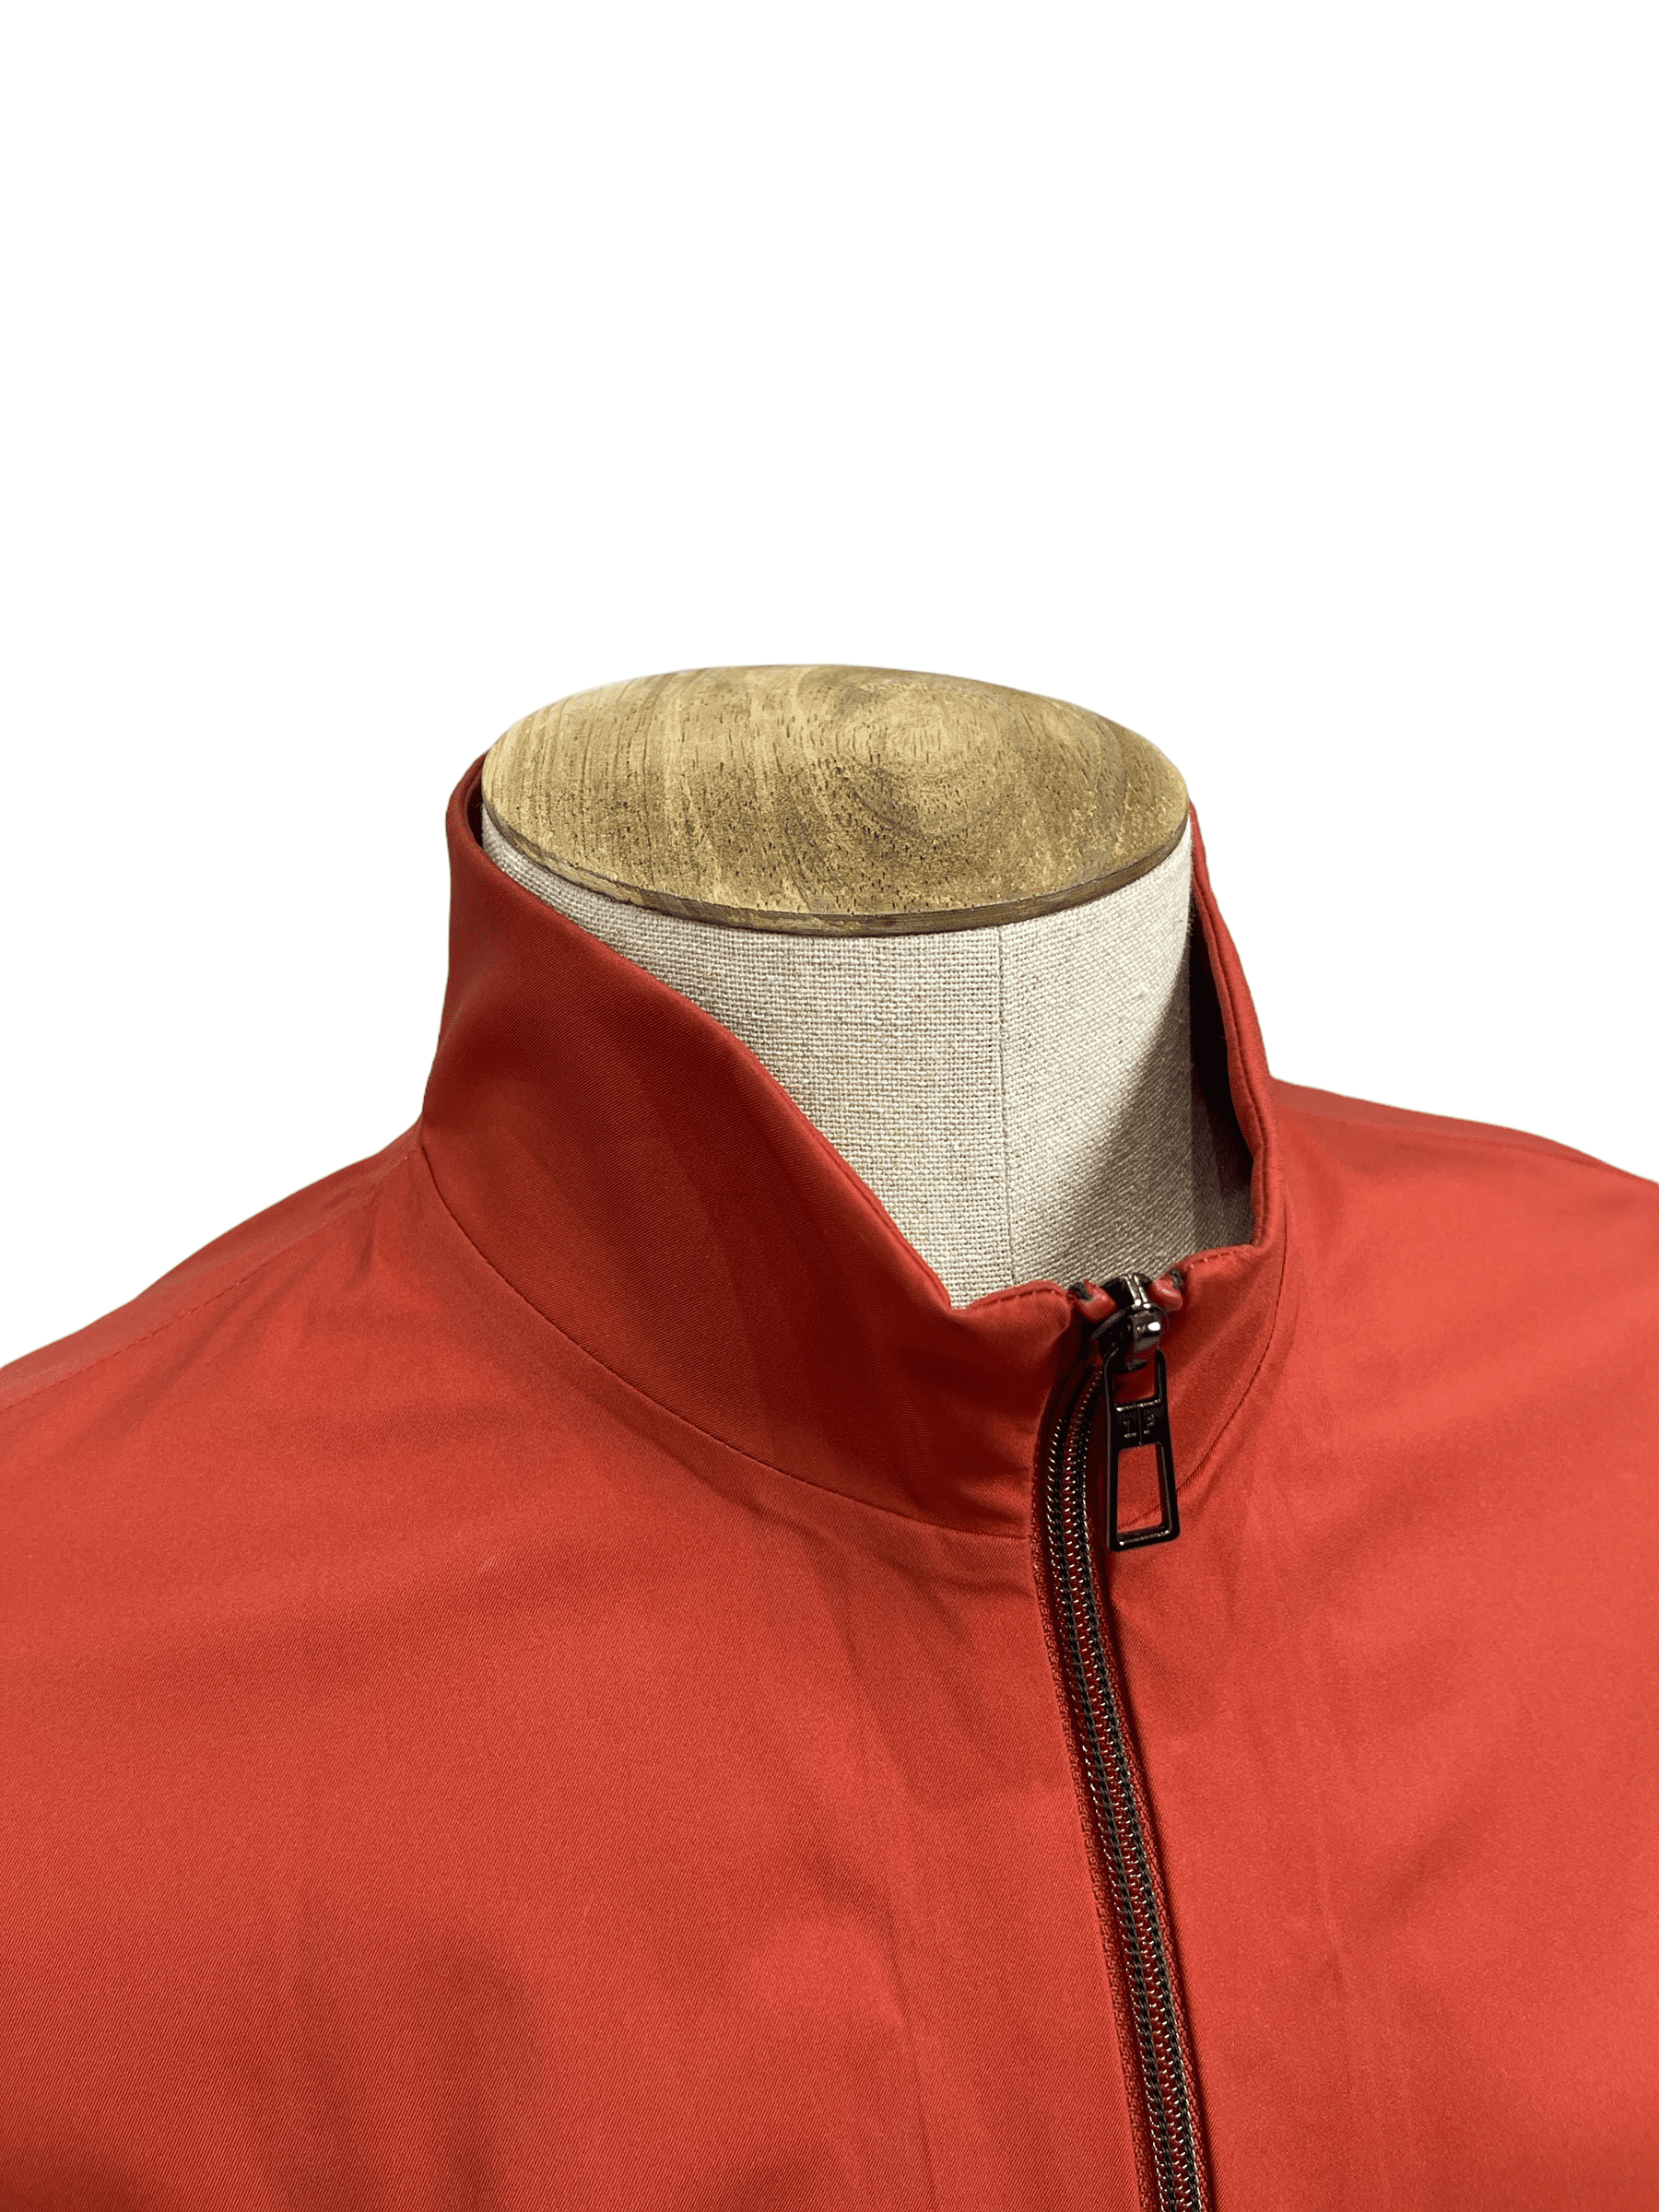 Loro Piana Burnt Orange Jacket - Genuine Design Luxury Consignment for Men. New & Pre-Owned Clothing, Shoes, & Accessories. Calgary, Canada